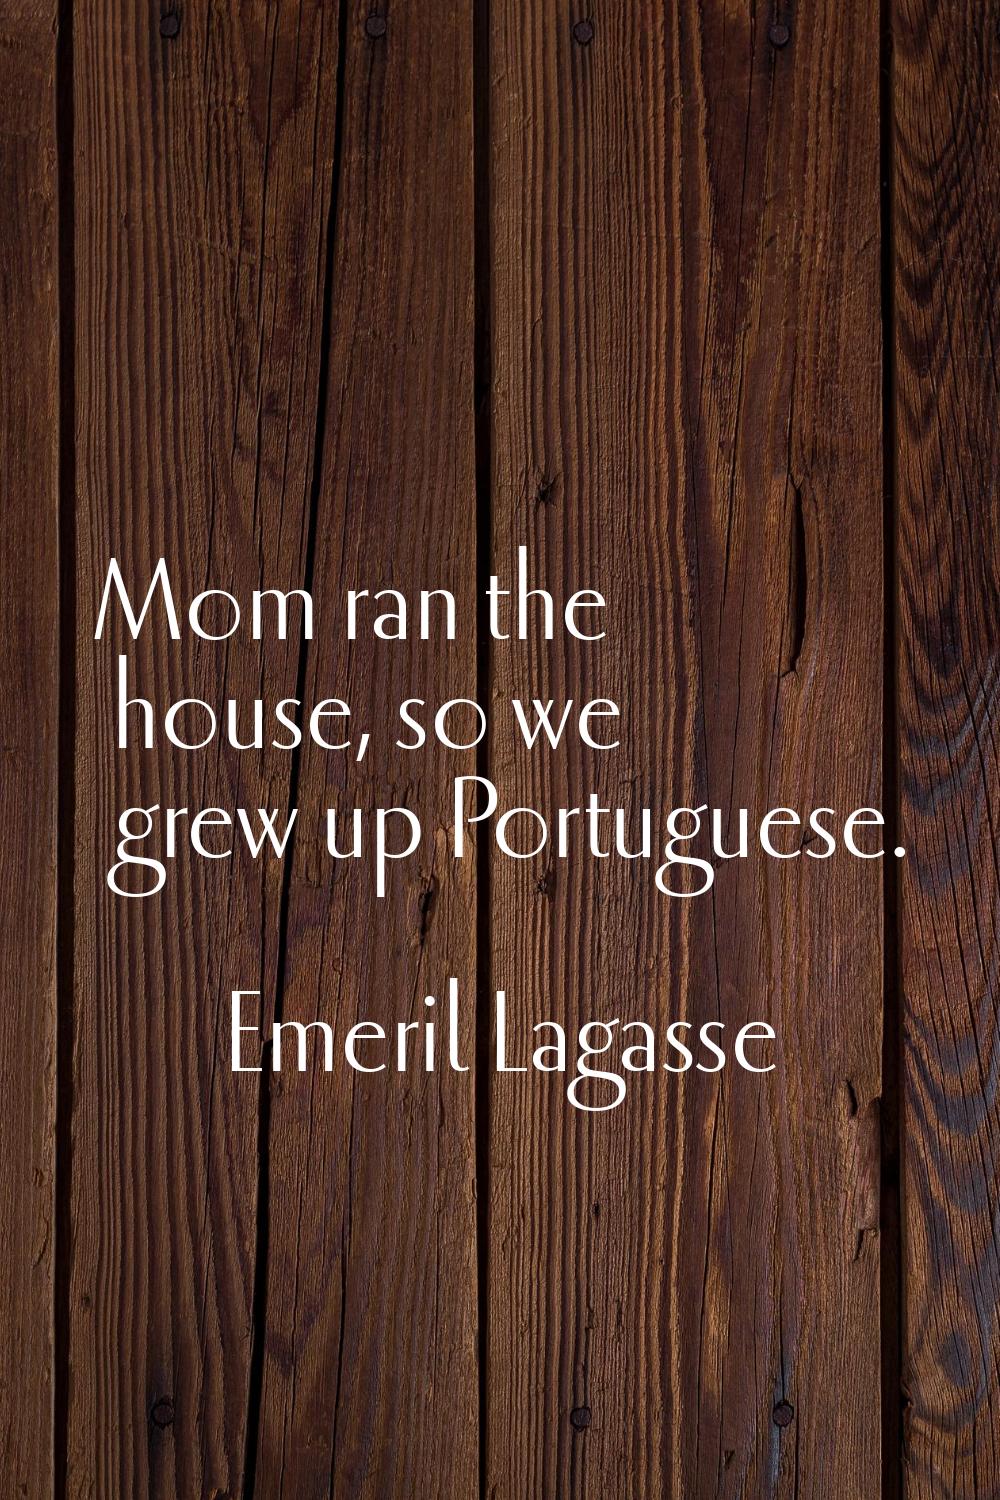 Mom ran the house, so we grew up Portuguese.